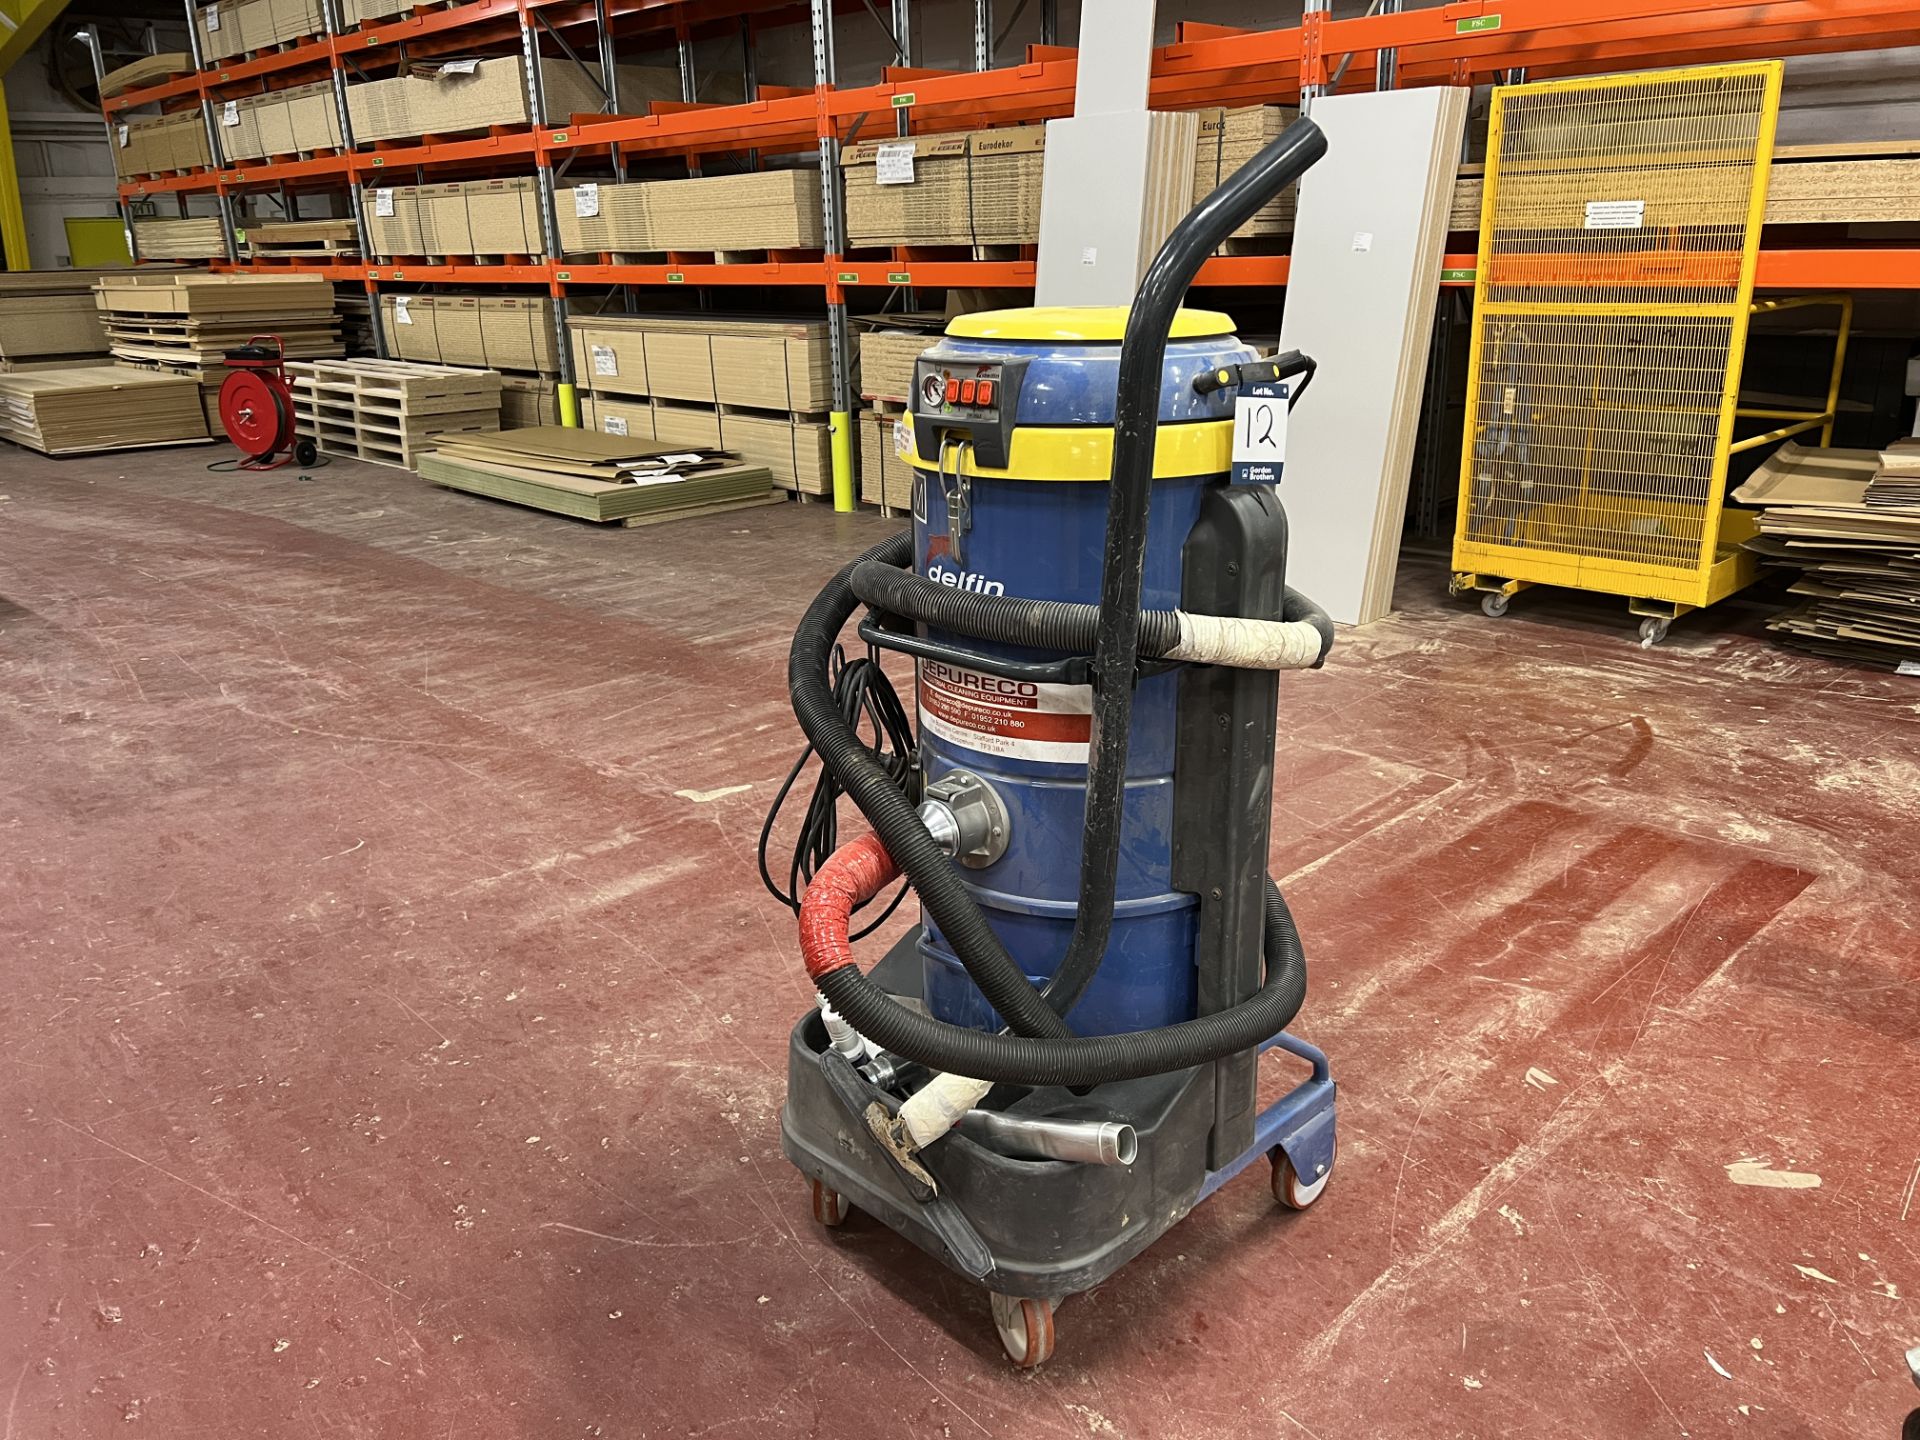 Delfin D/M3-001 mobile dust extractor with L filter fitted, 230 volts, 3.45 Kw, S/No. 140760767, DOM